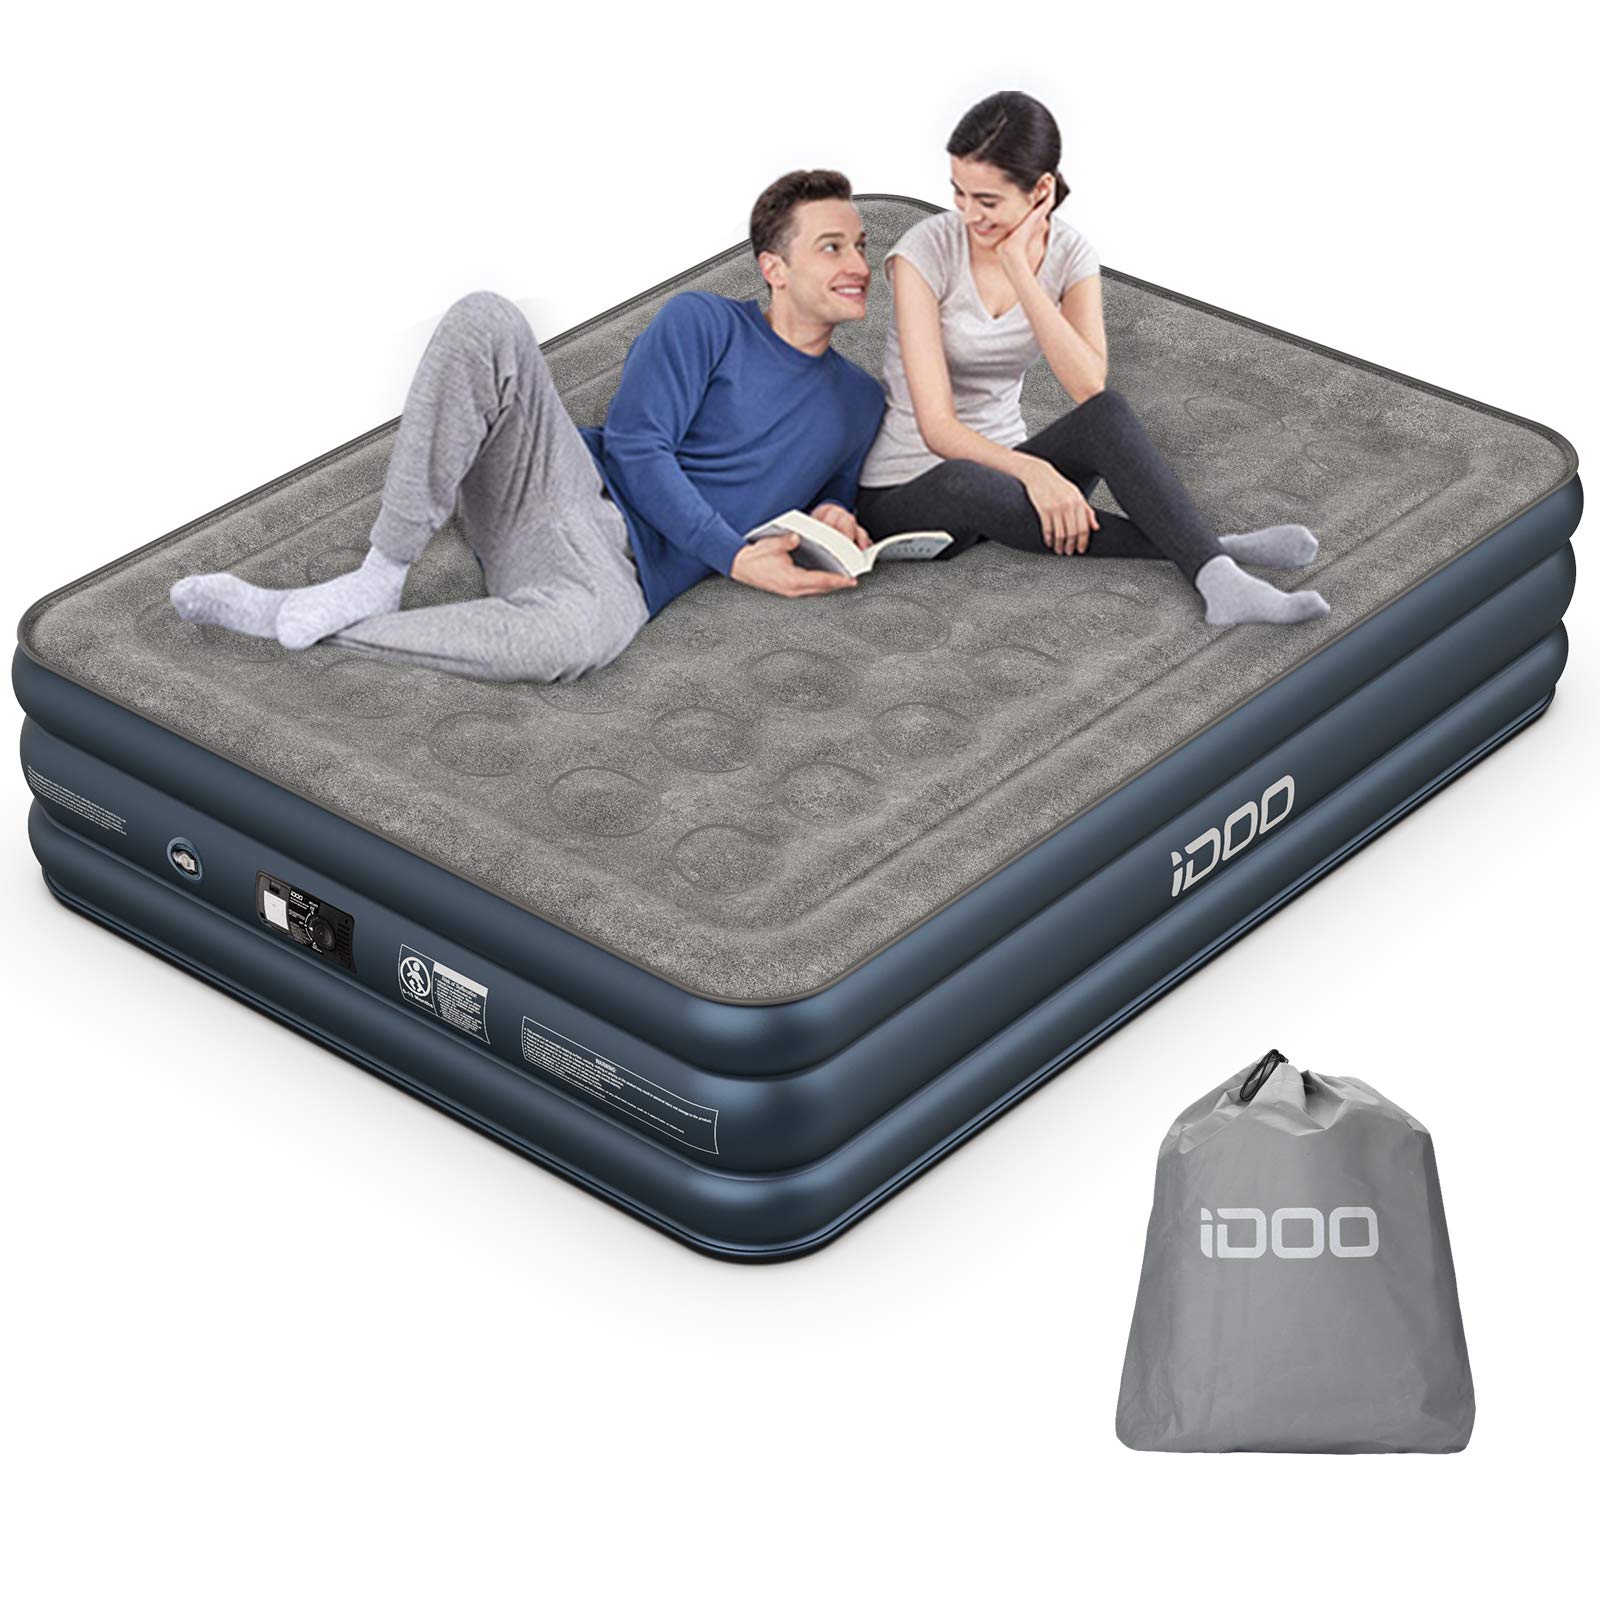 iDOO Queen size Air Bed, Inflatable bed with Built-in Pump, 3 Mins Quick Self-Inflation/Deflation Air Mattress, Blow Up Bed for Home Portable Camping Travel 205*156*46cm 295kg MAX